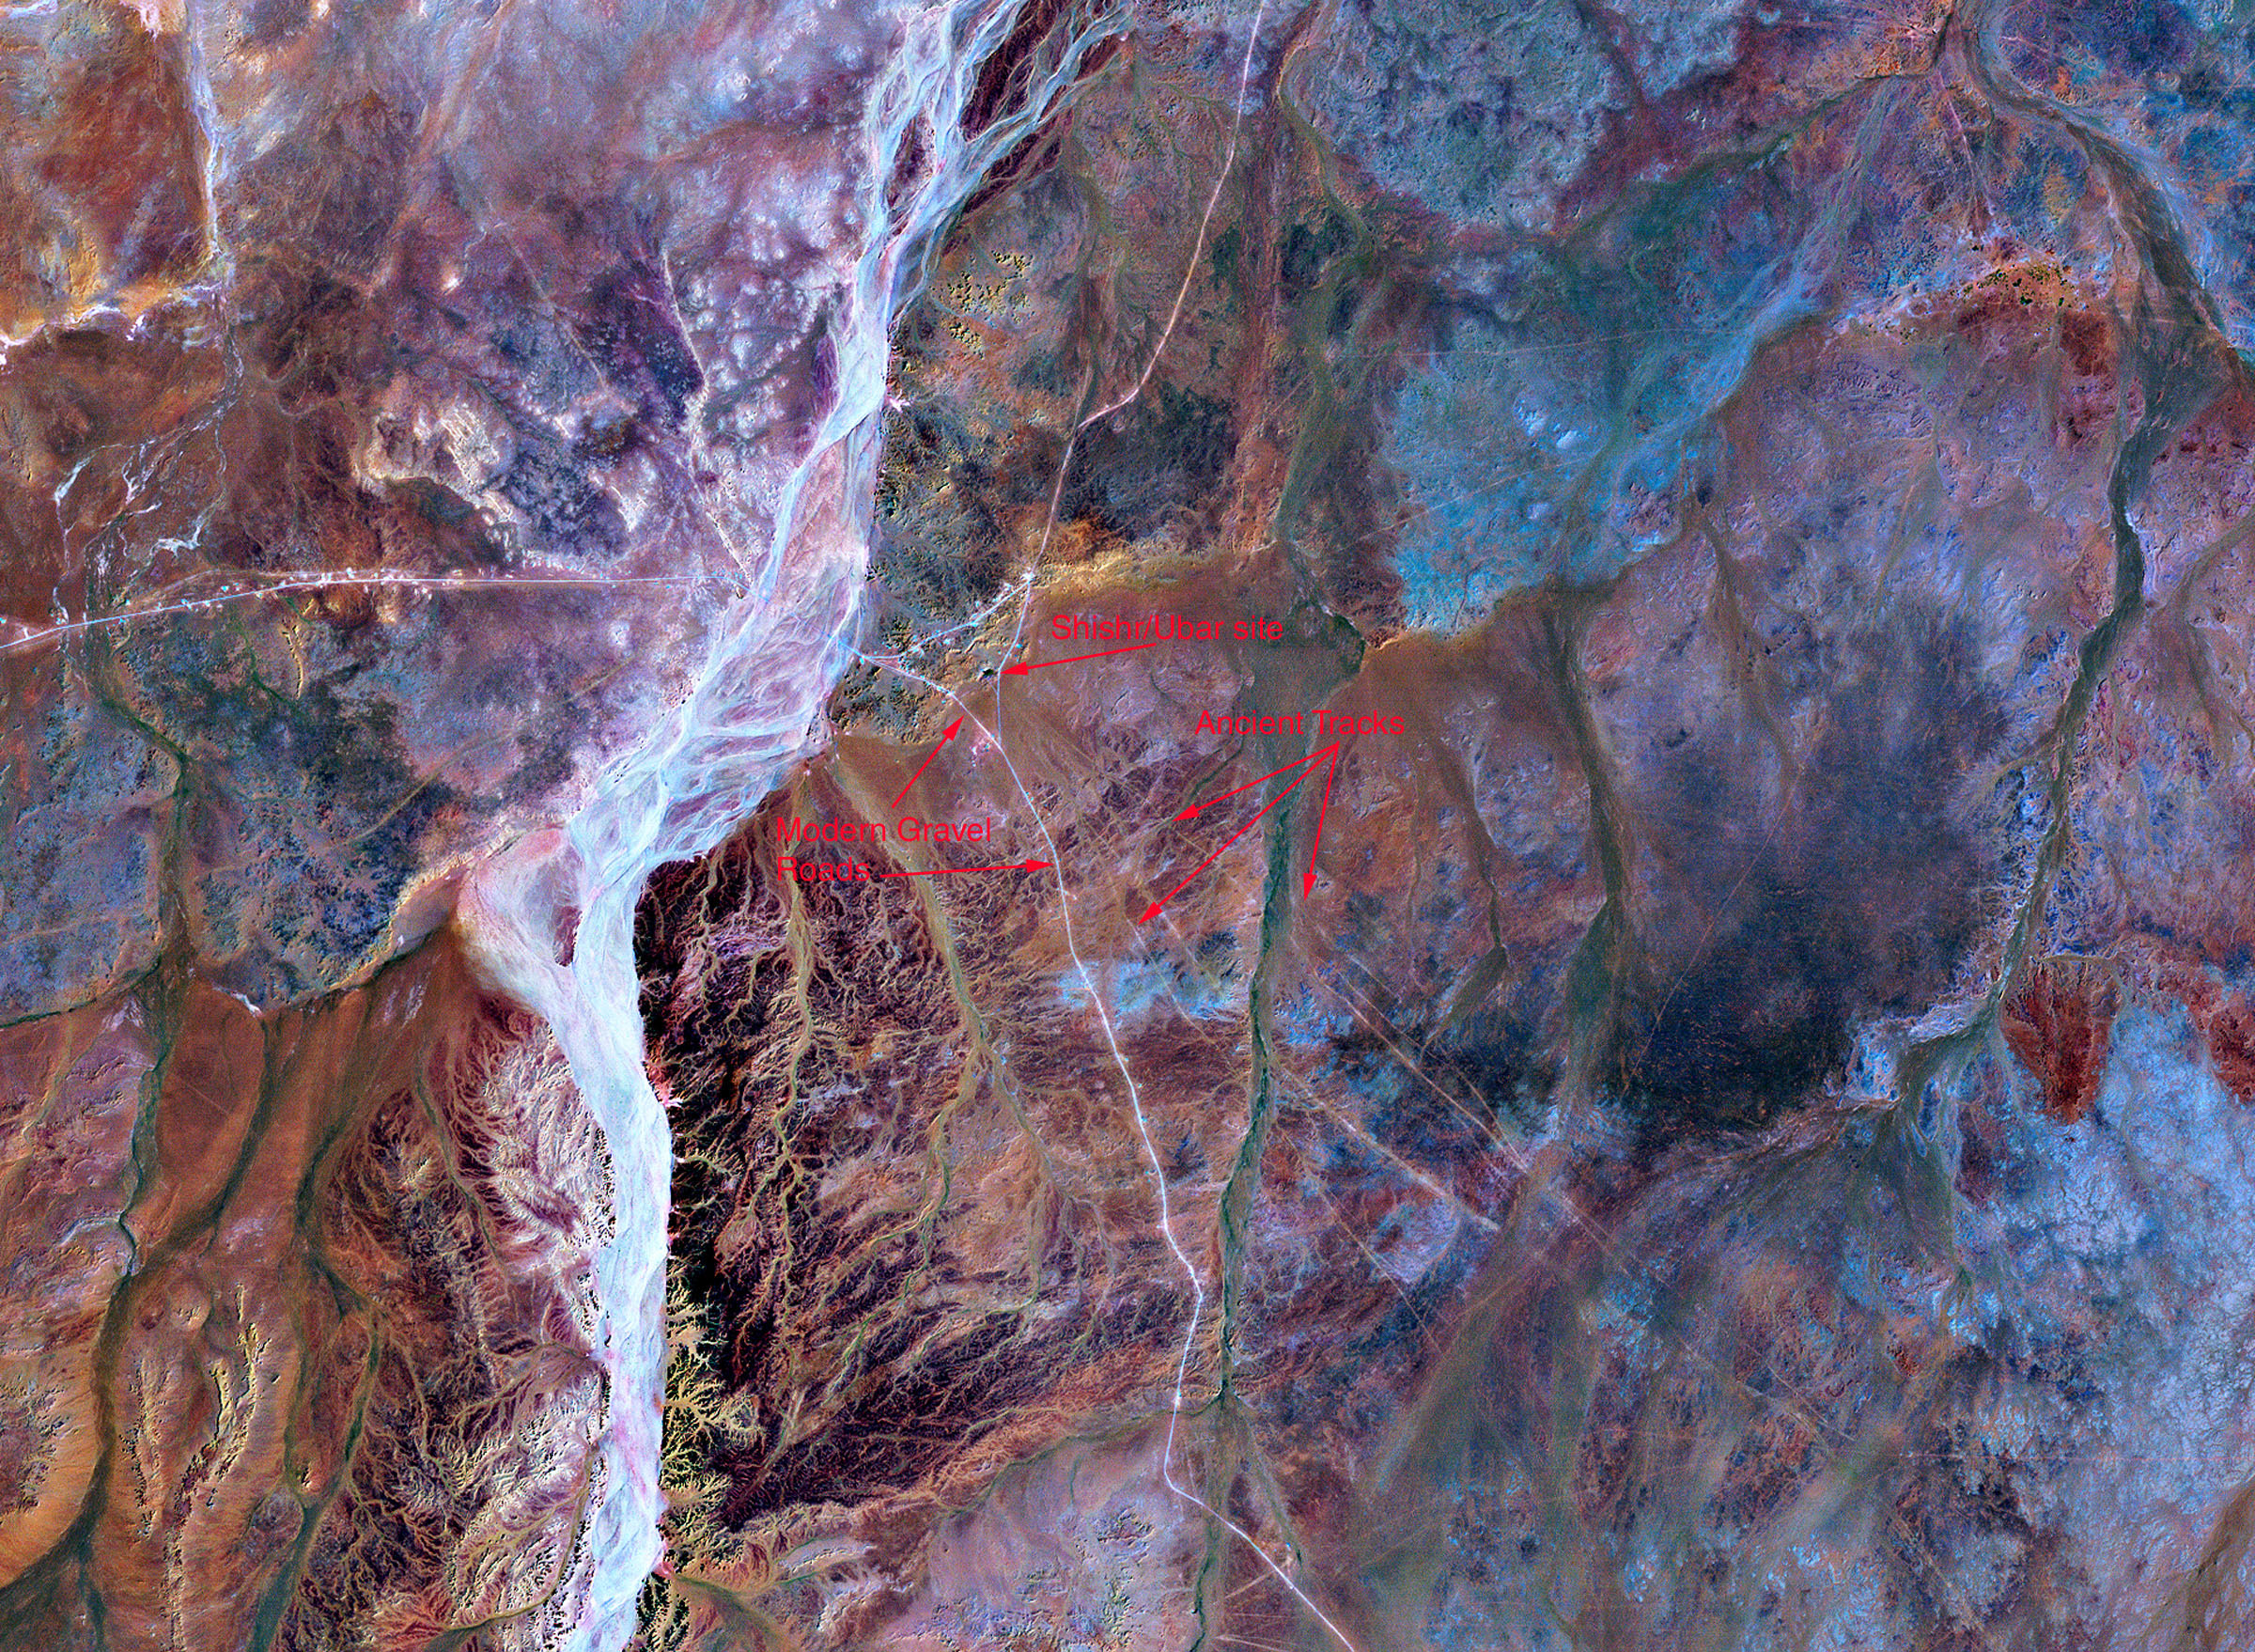 Modern roads and ancient tracks in Oman, as seen from space by the Landsat satellite. Credit: NASA/USGS.